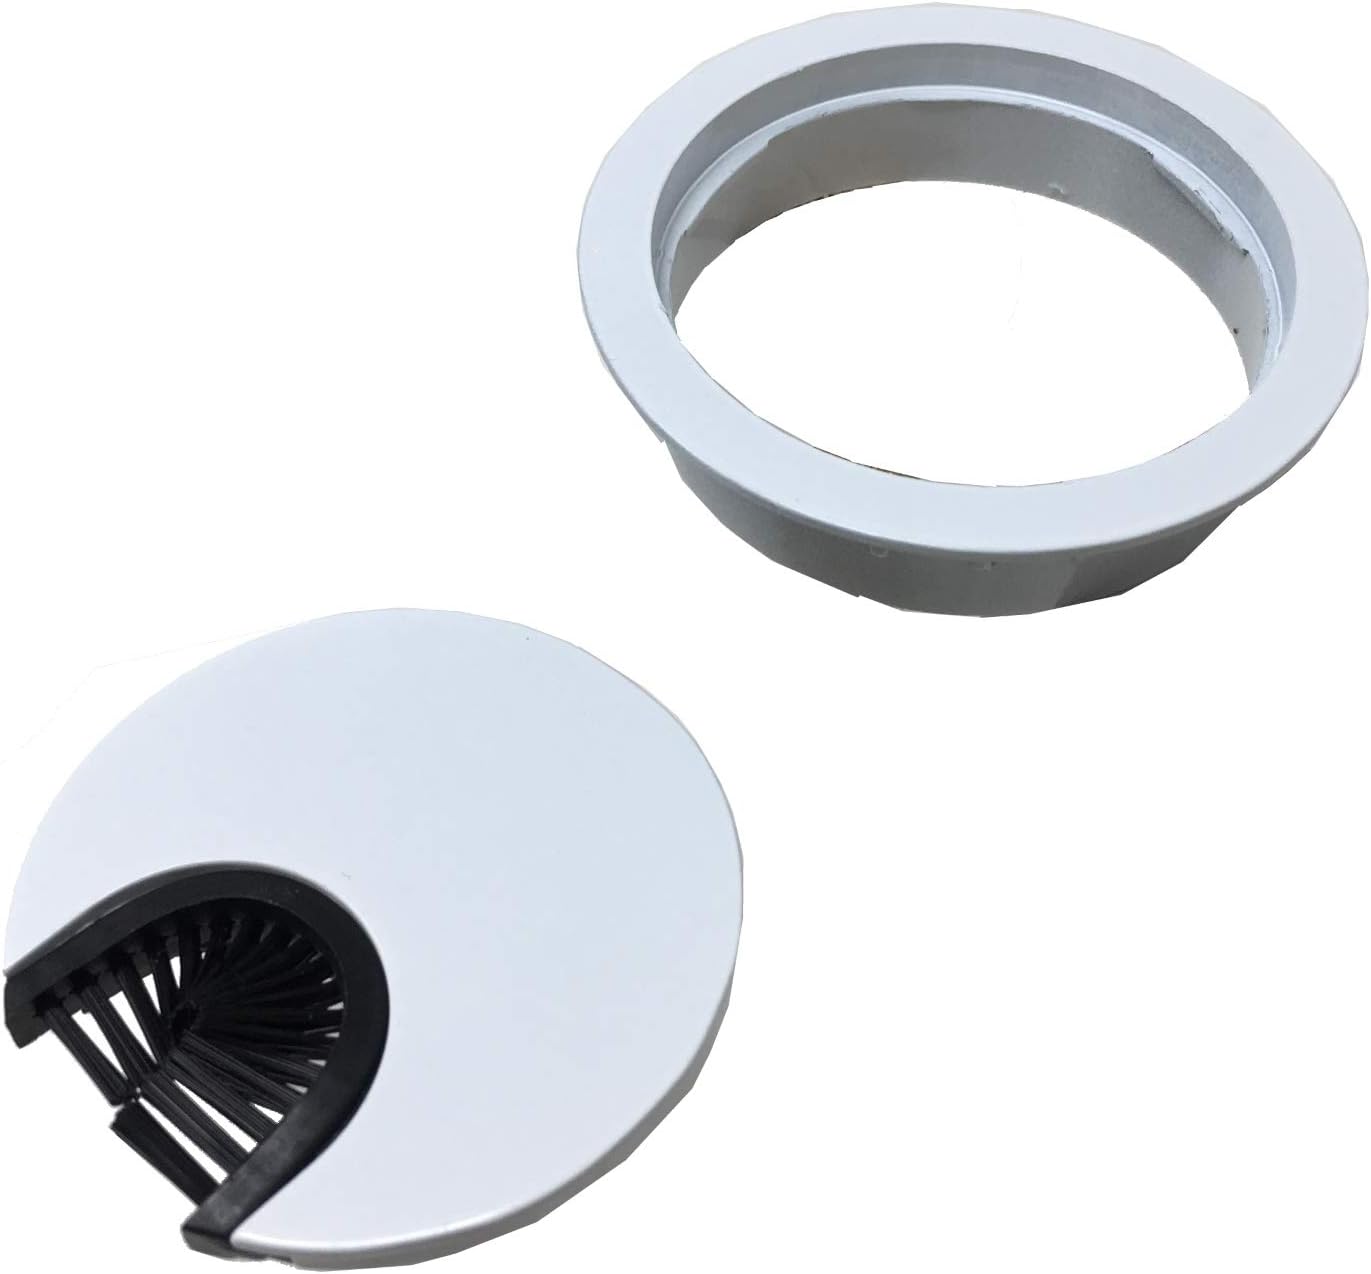 Desunia Gloss White Metal Cable Grommet - 2 Piece"Lock in" Feature with"Brush" Opening for Management of Office